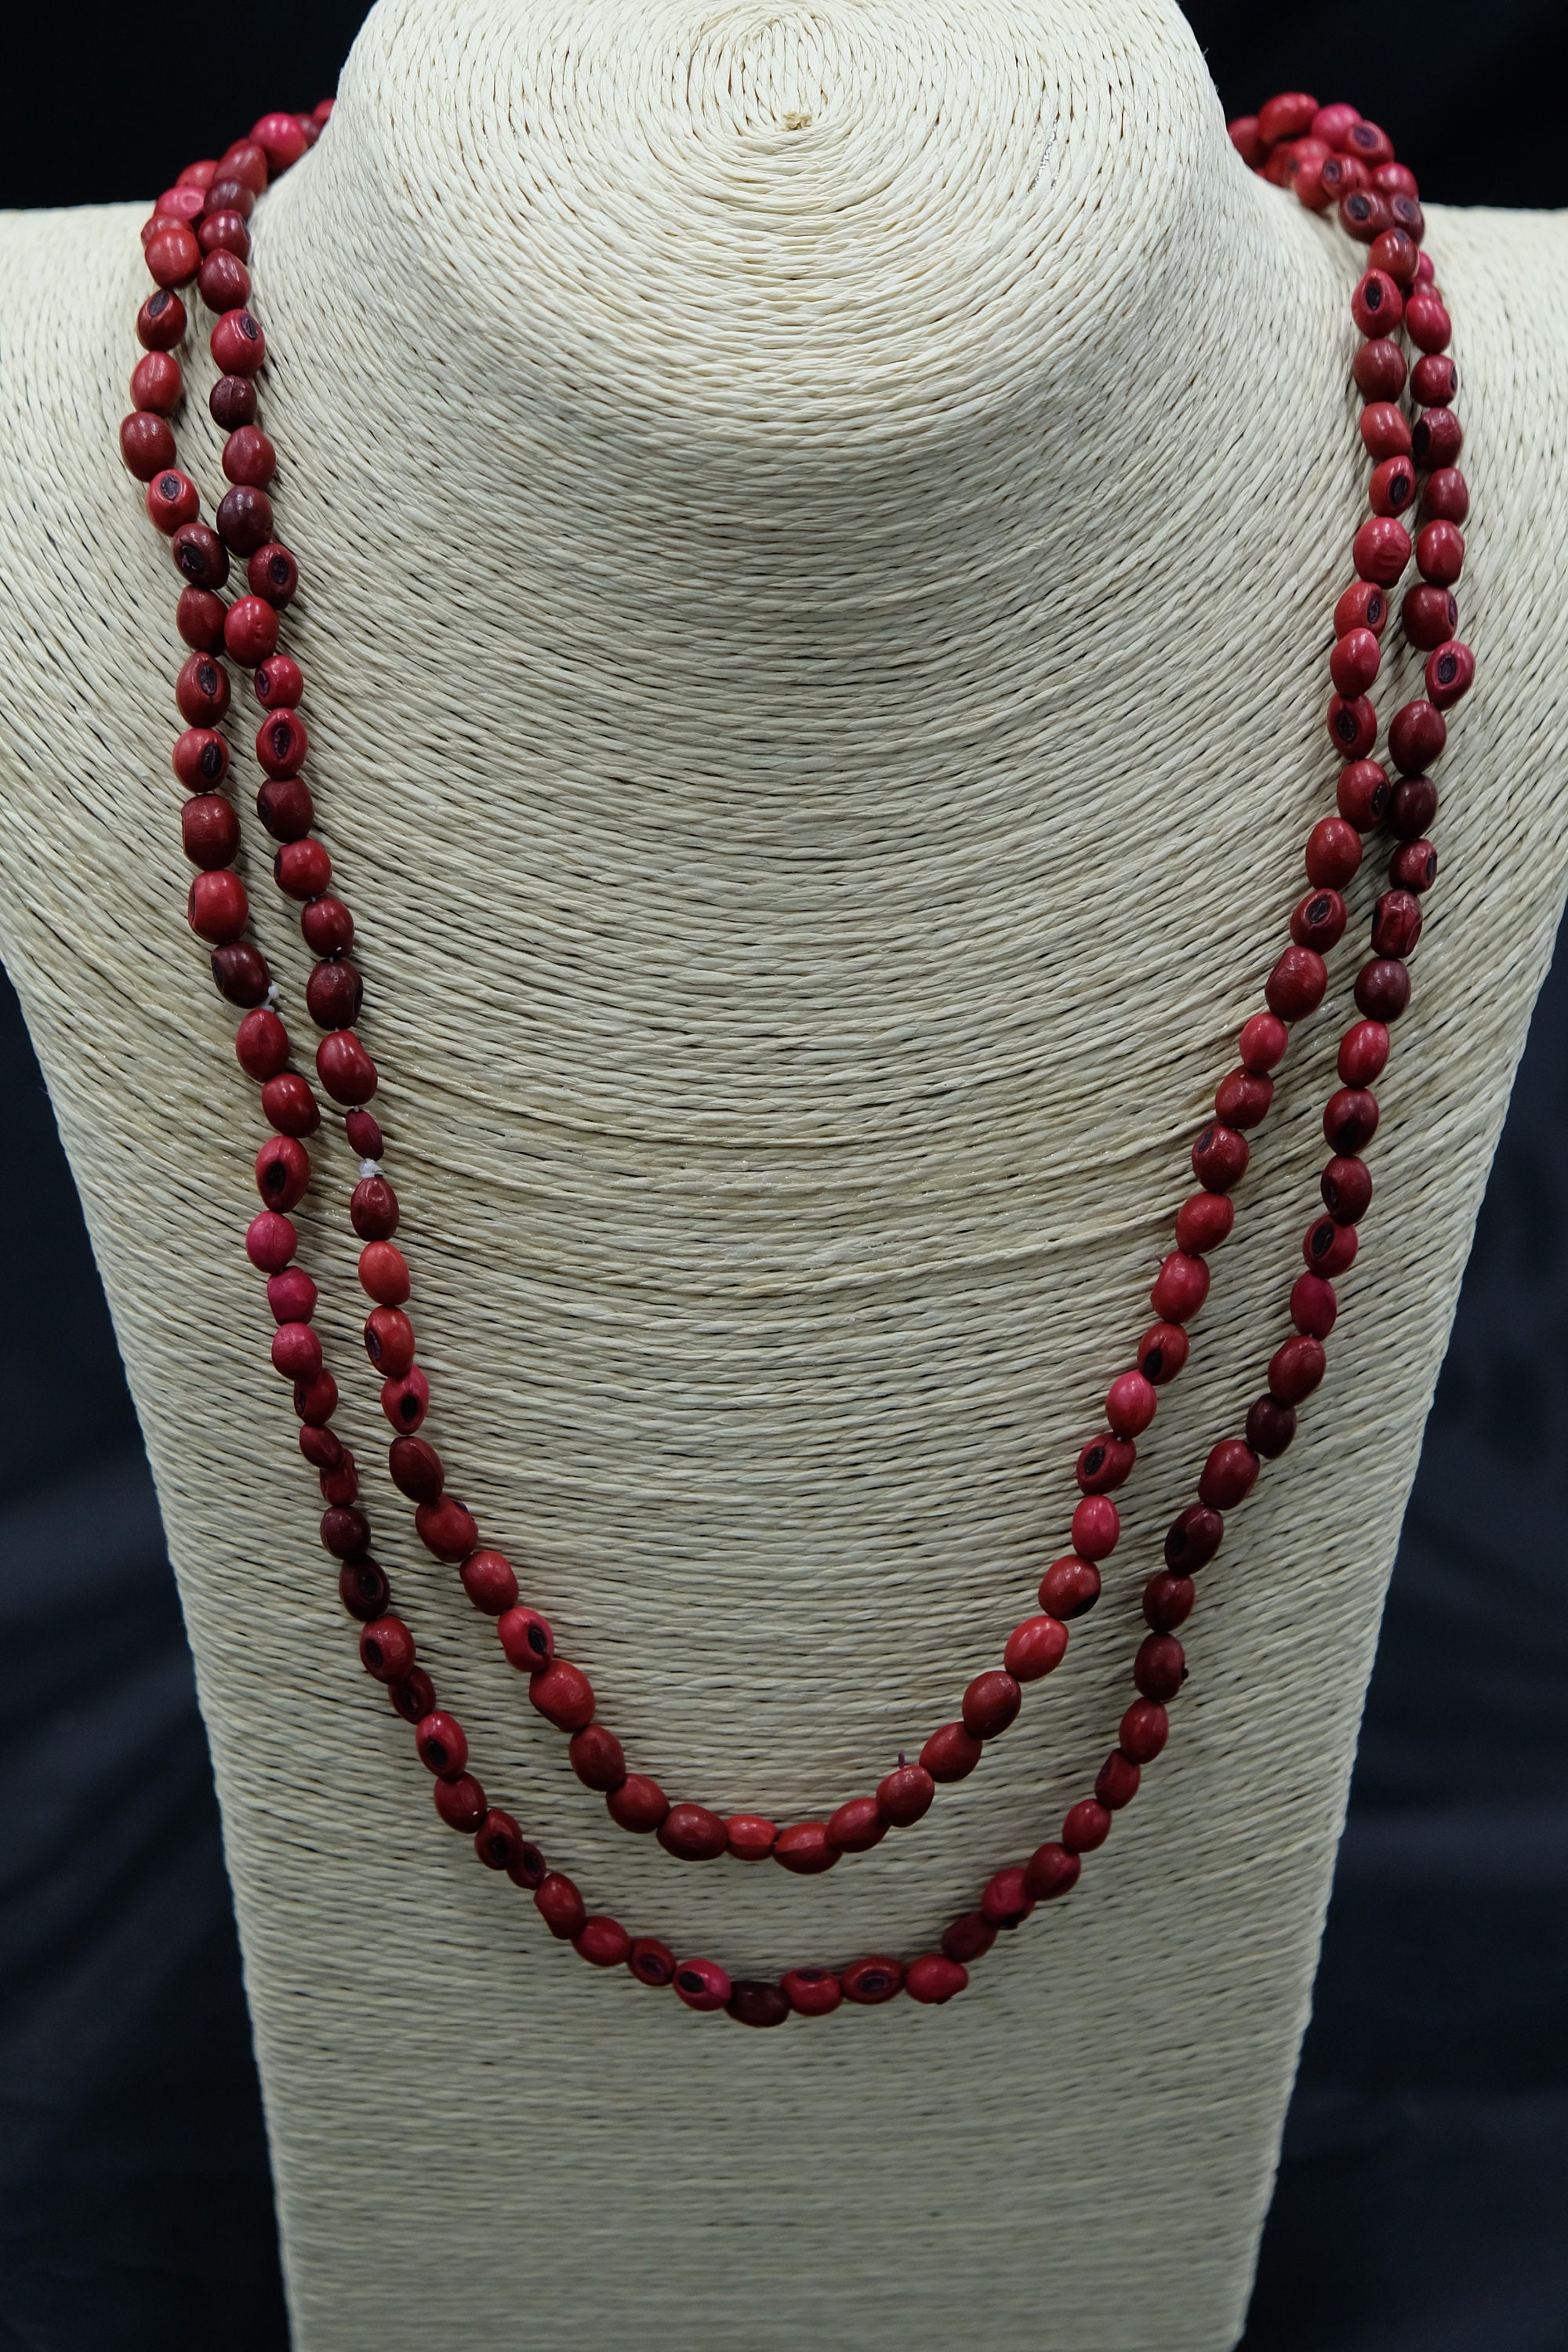 Women's Seed Necklace From Africa - Etsy